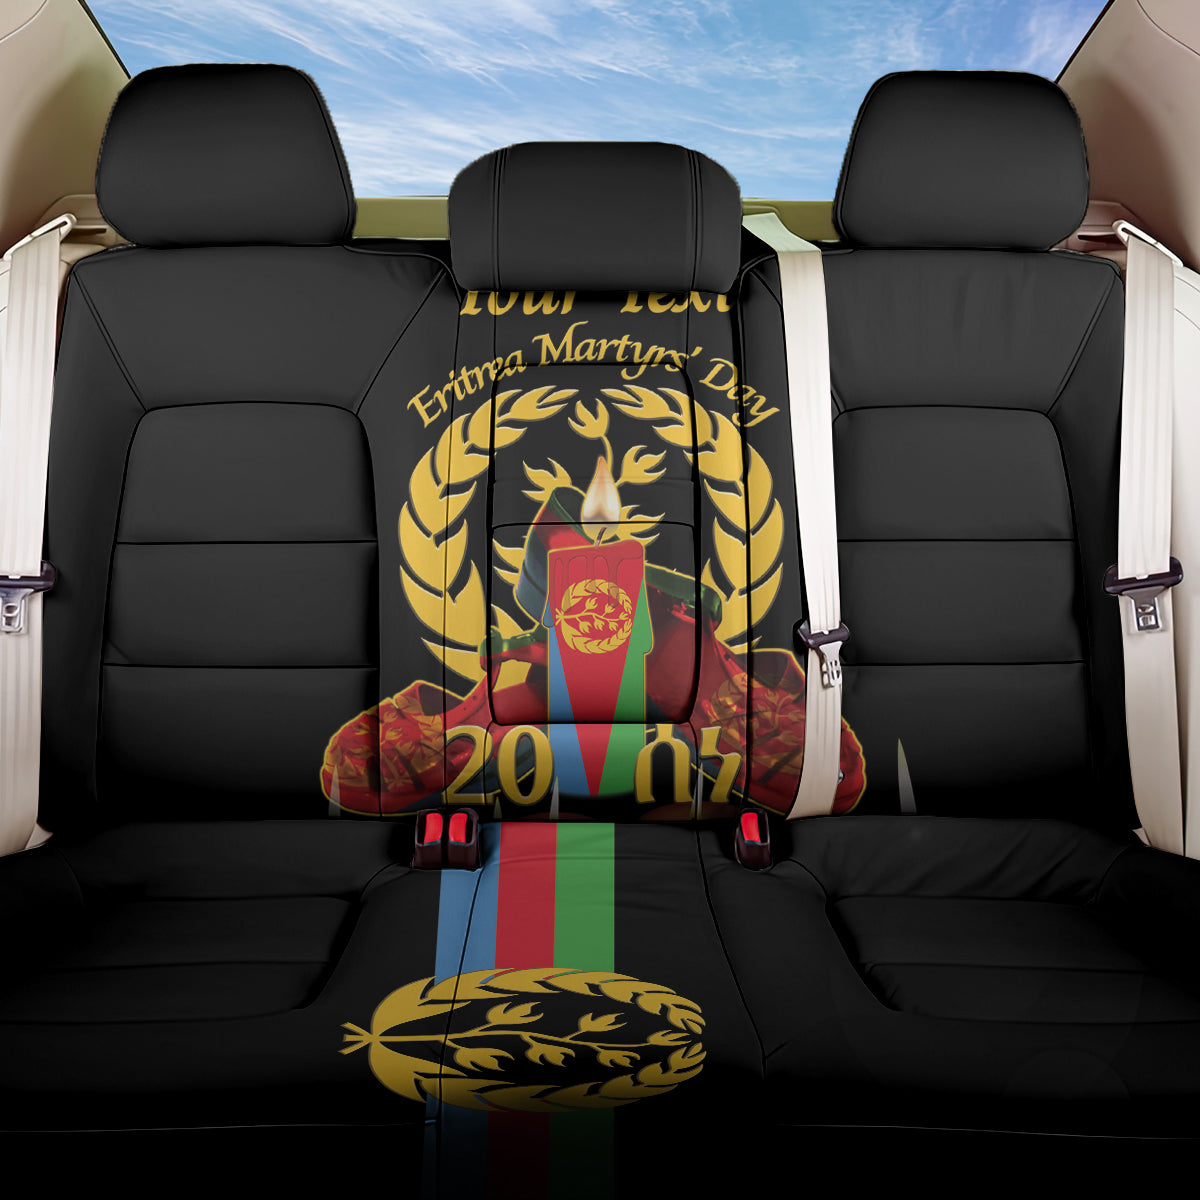 Custom Eritrea Martyrs' Day Back Car Seat Cover 20 June Shida Shoes With Candles - Black